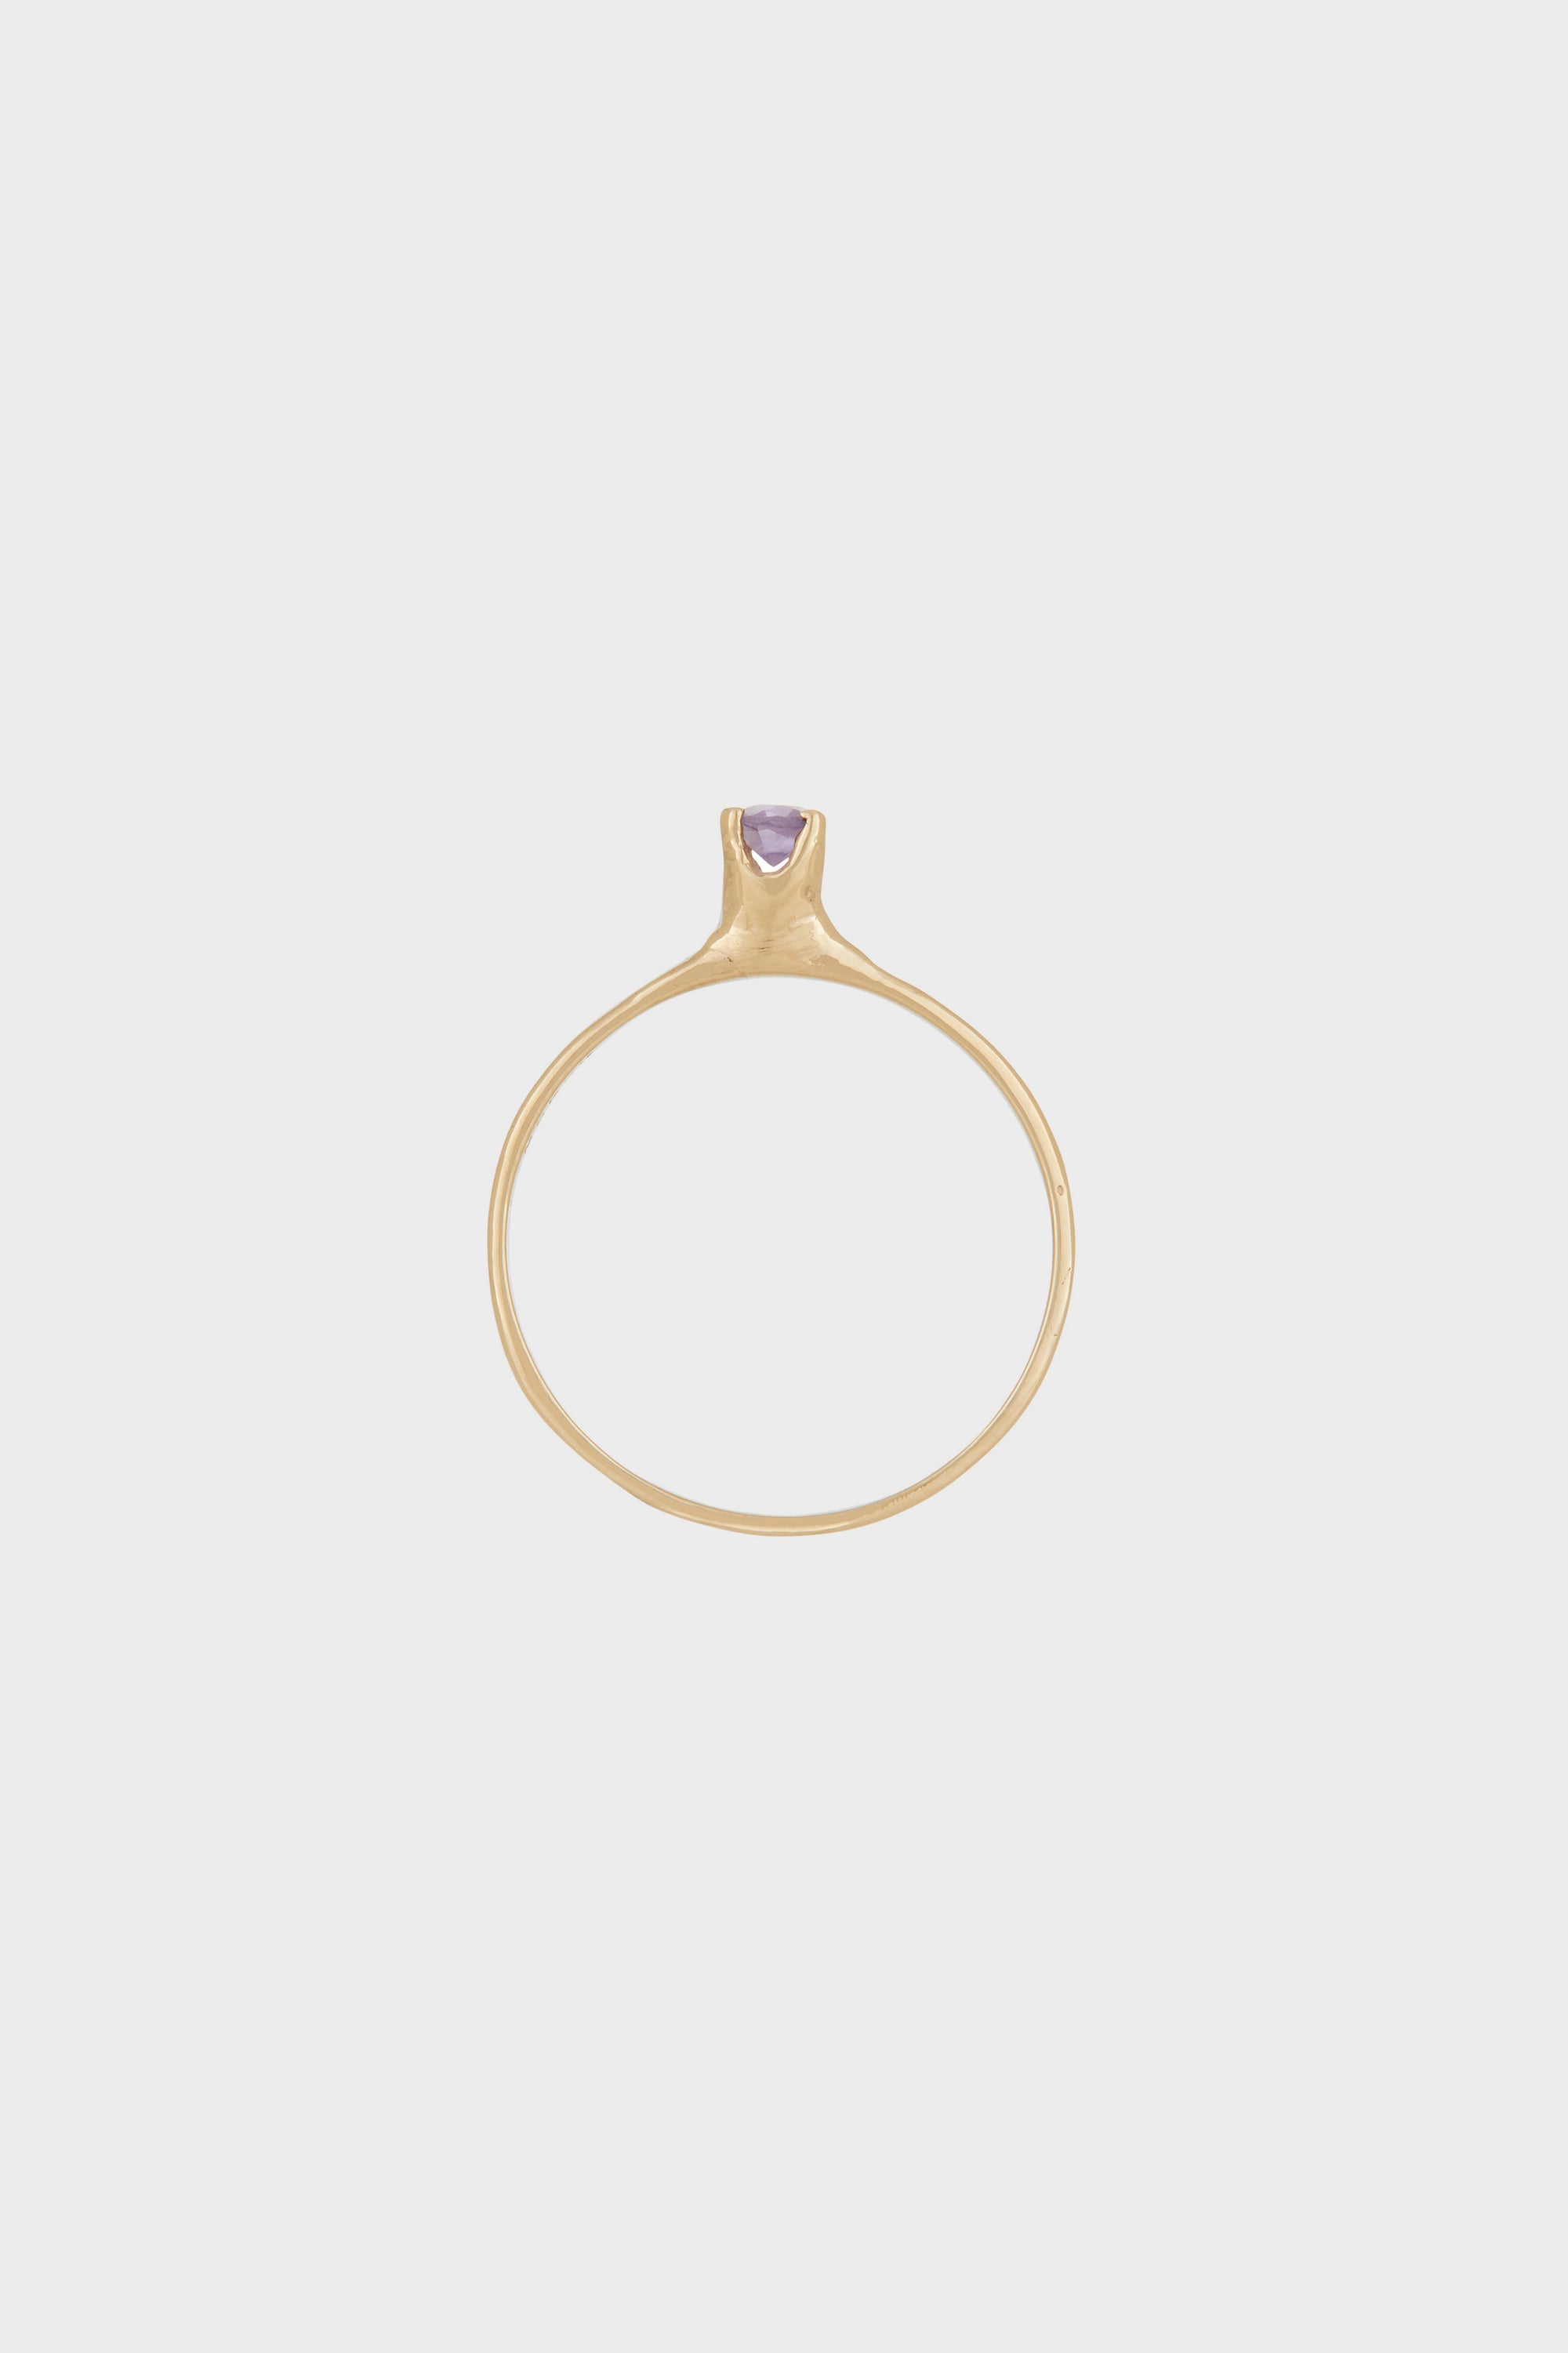 Palace Ring in Amethyst & 14k Yellow Gold